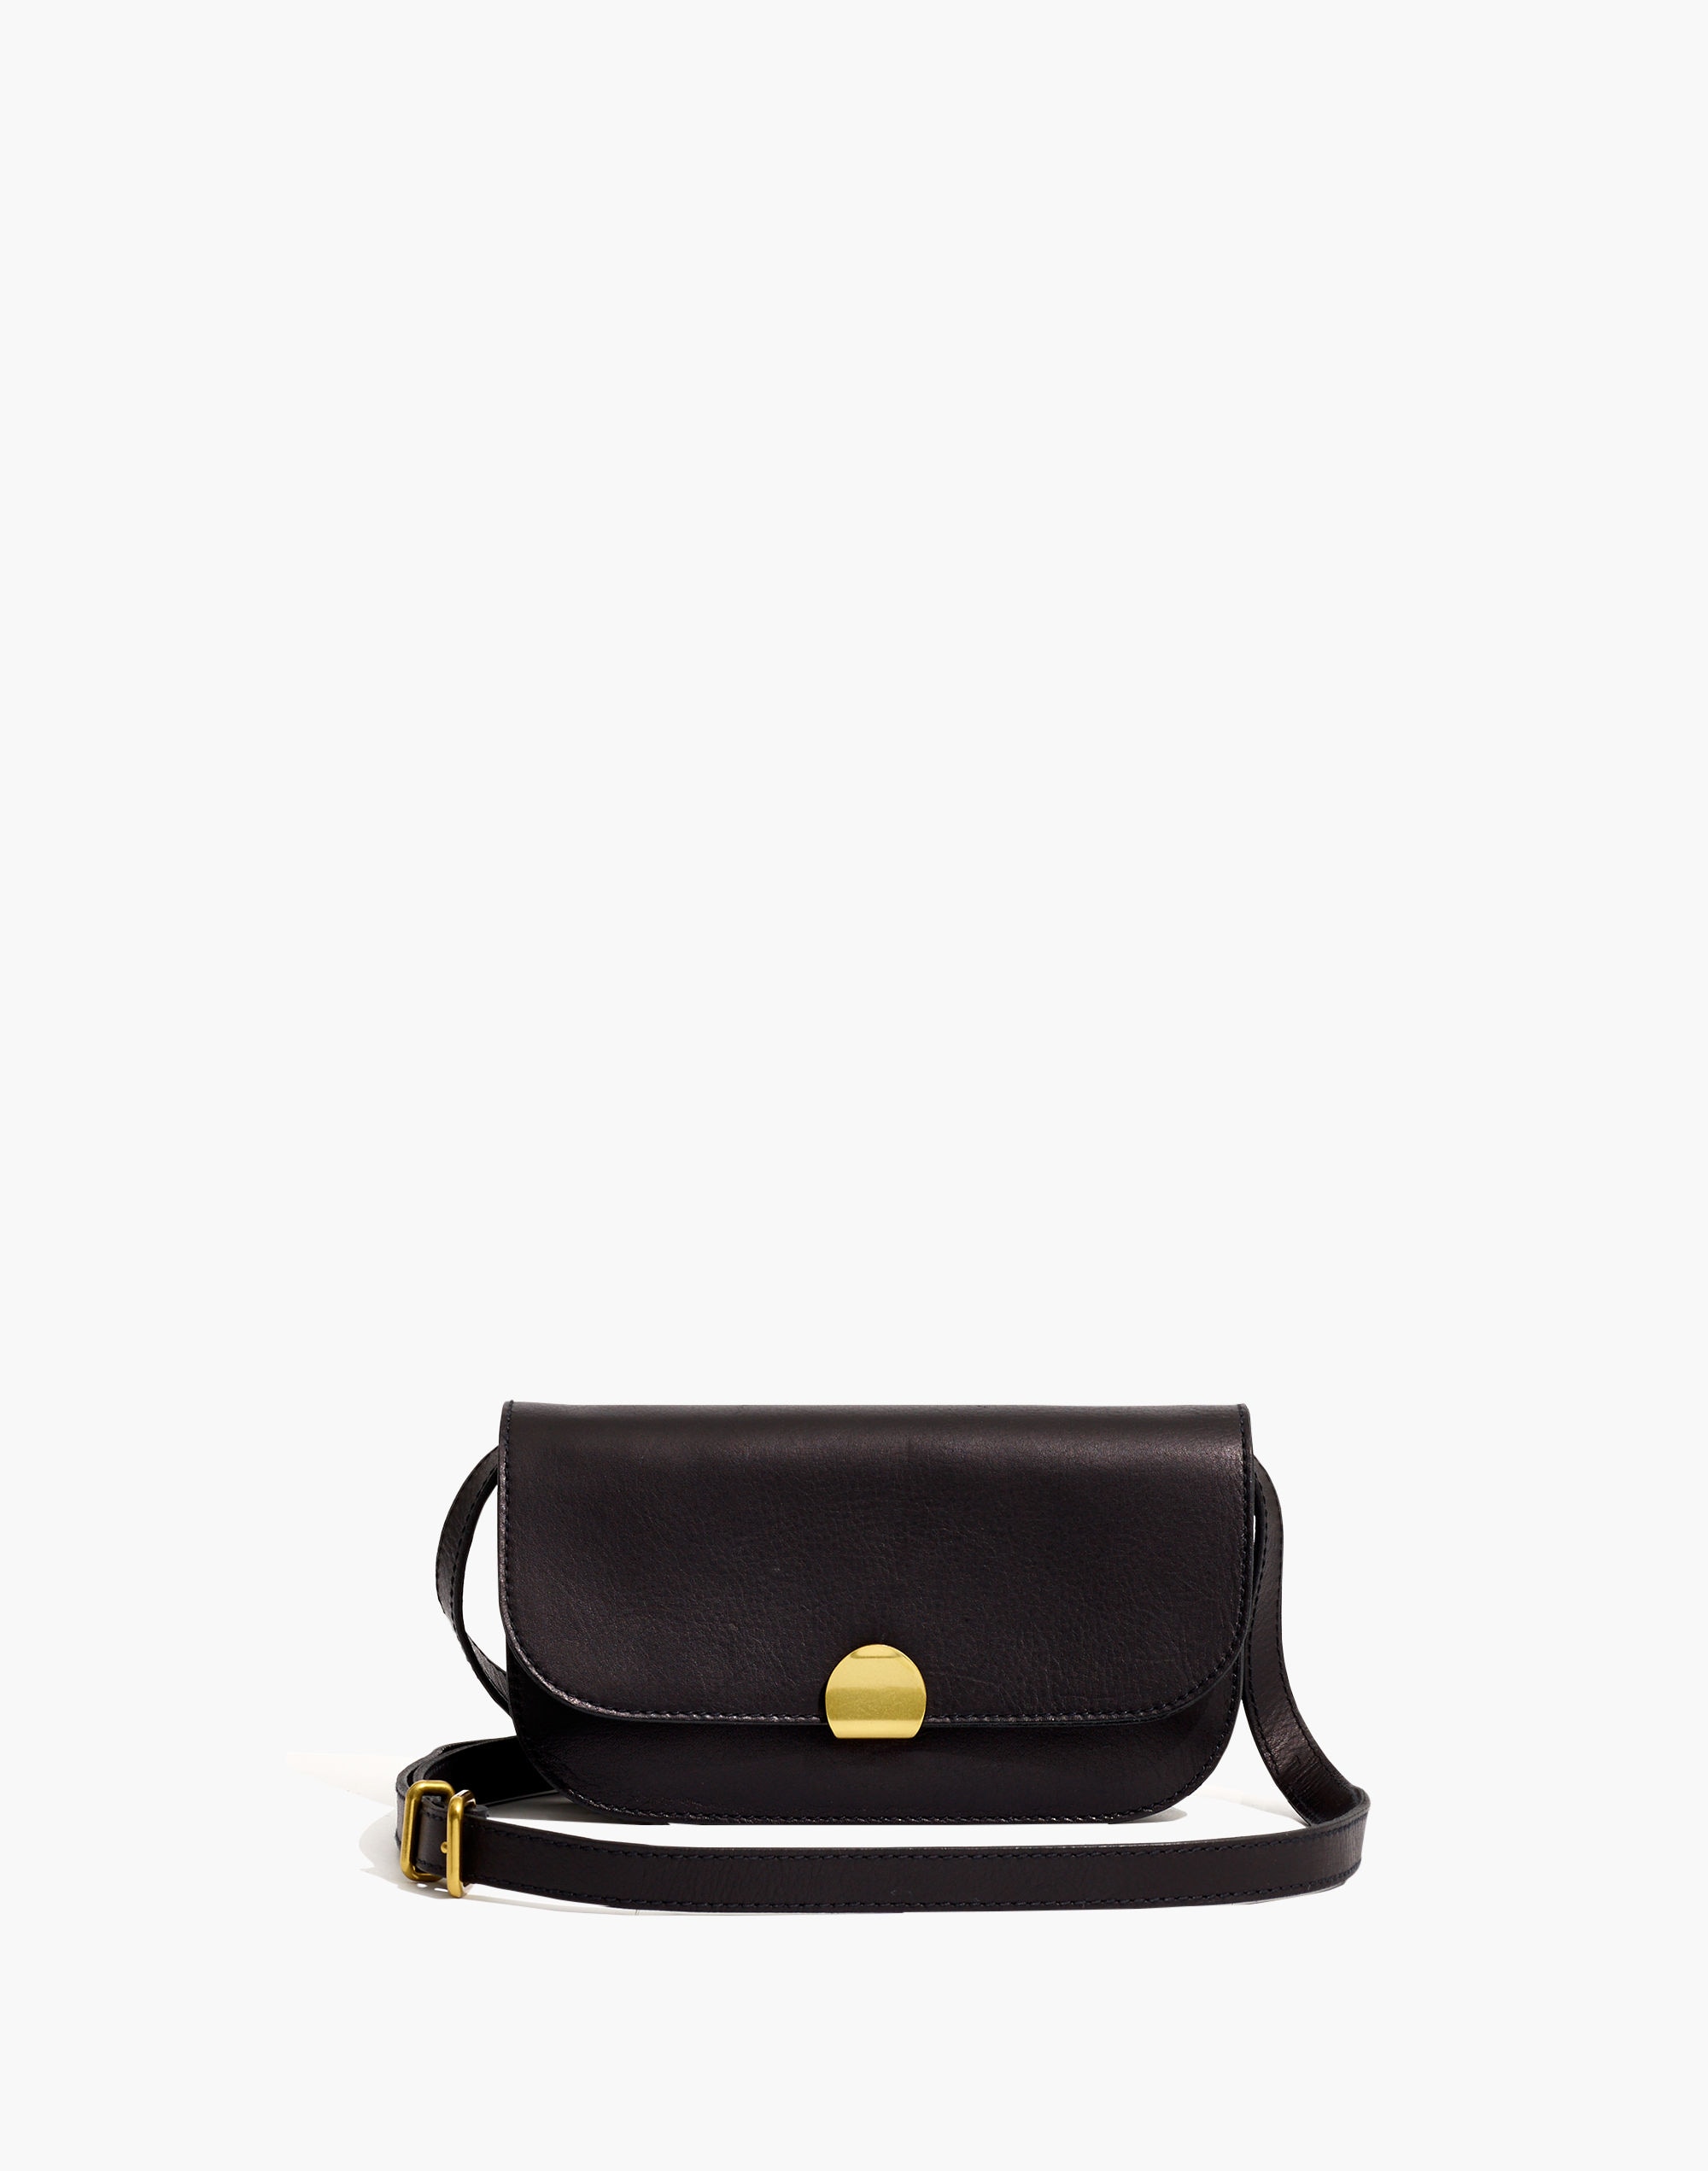 The Abroad Convertible Crossbody Bag in Leather